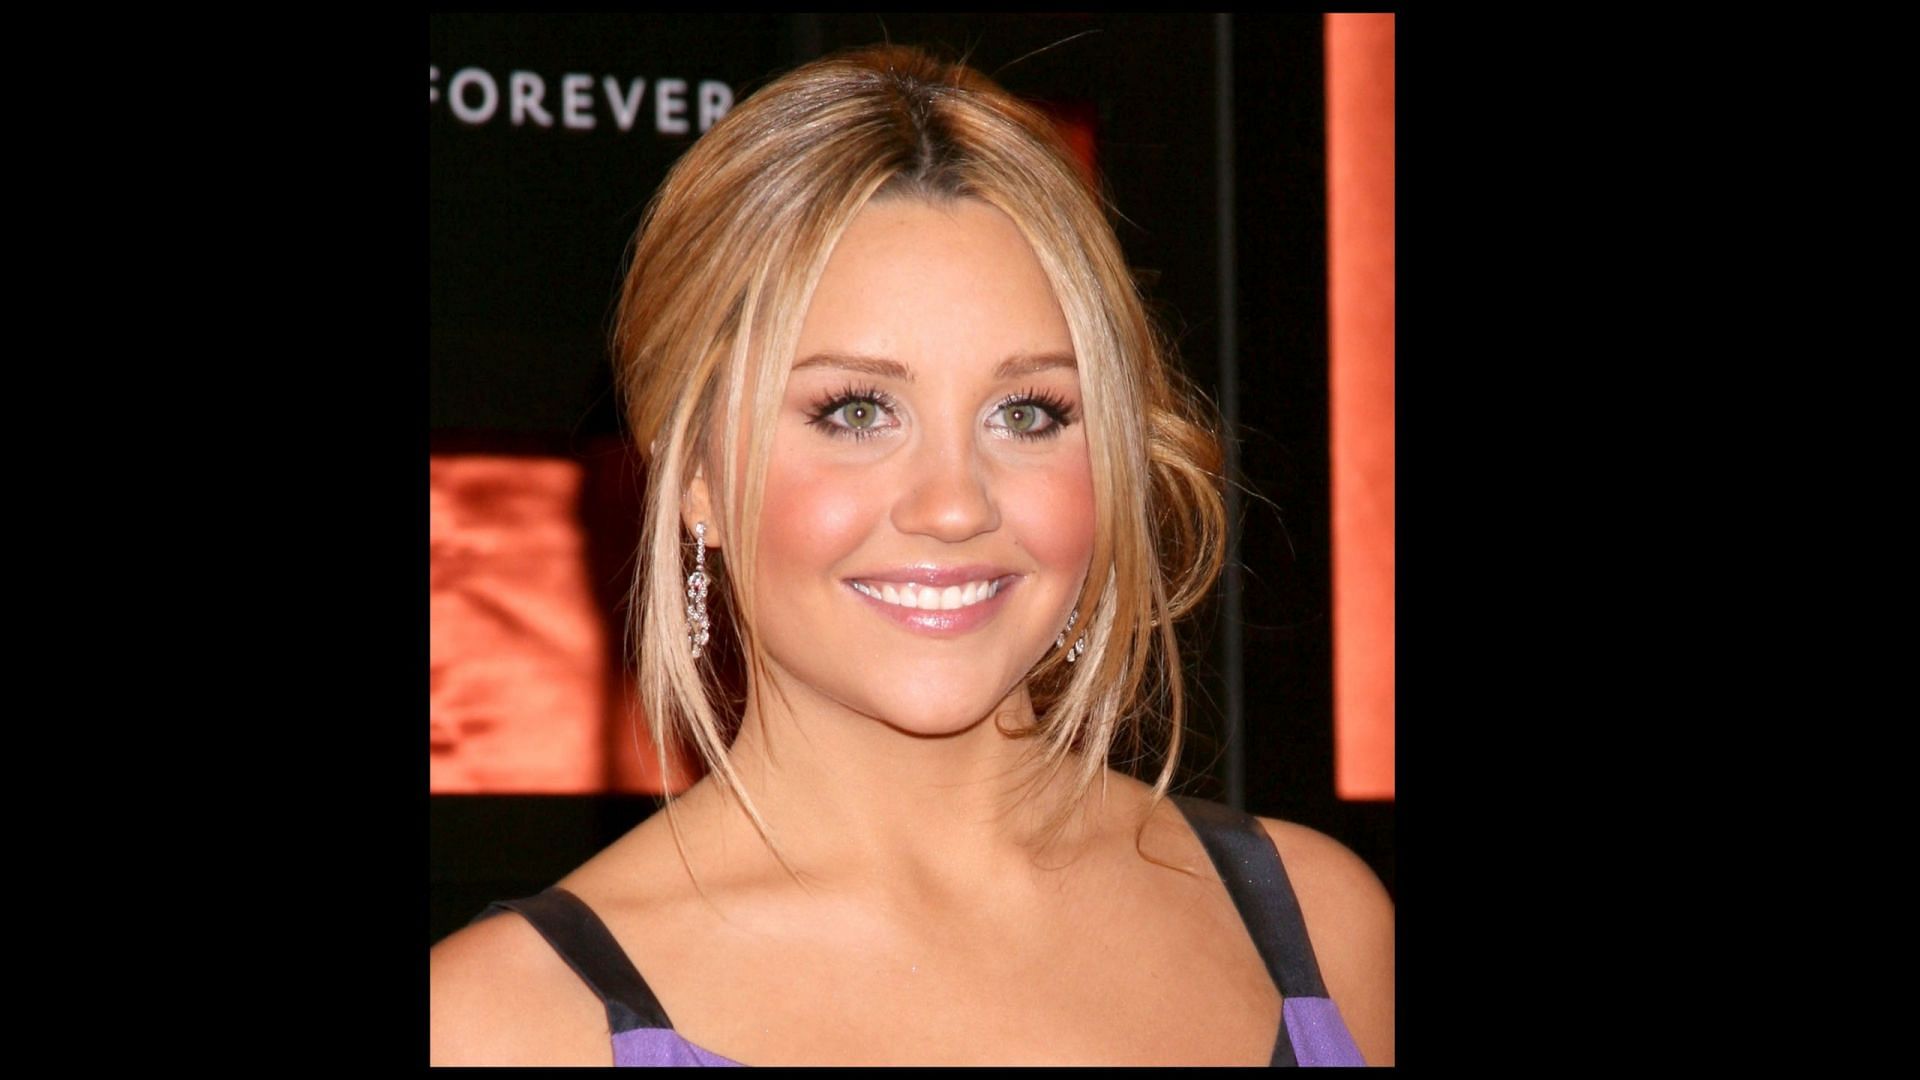 Amanda Bynes is a hollywood star loved by many for her early roles in 2000s films. (Image via Vecteezy/ Kathy Hutchins)